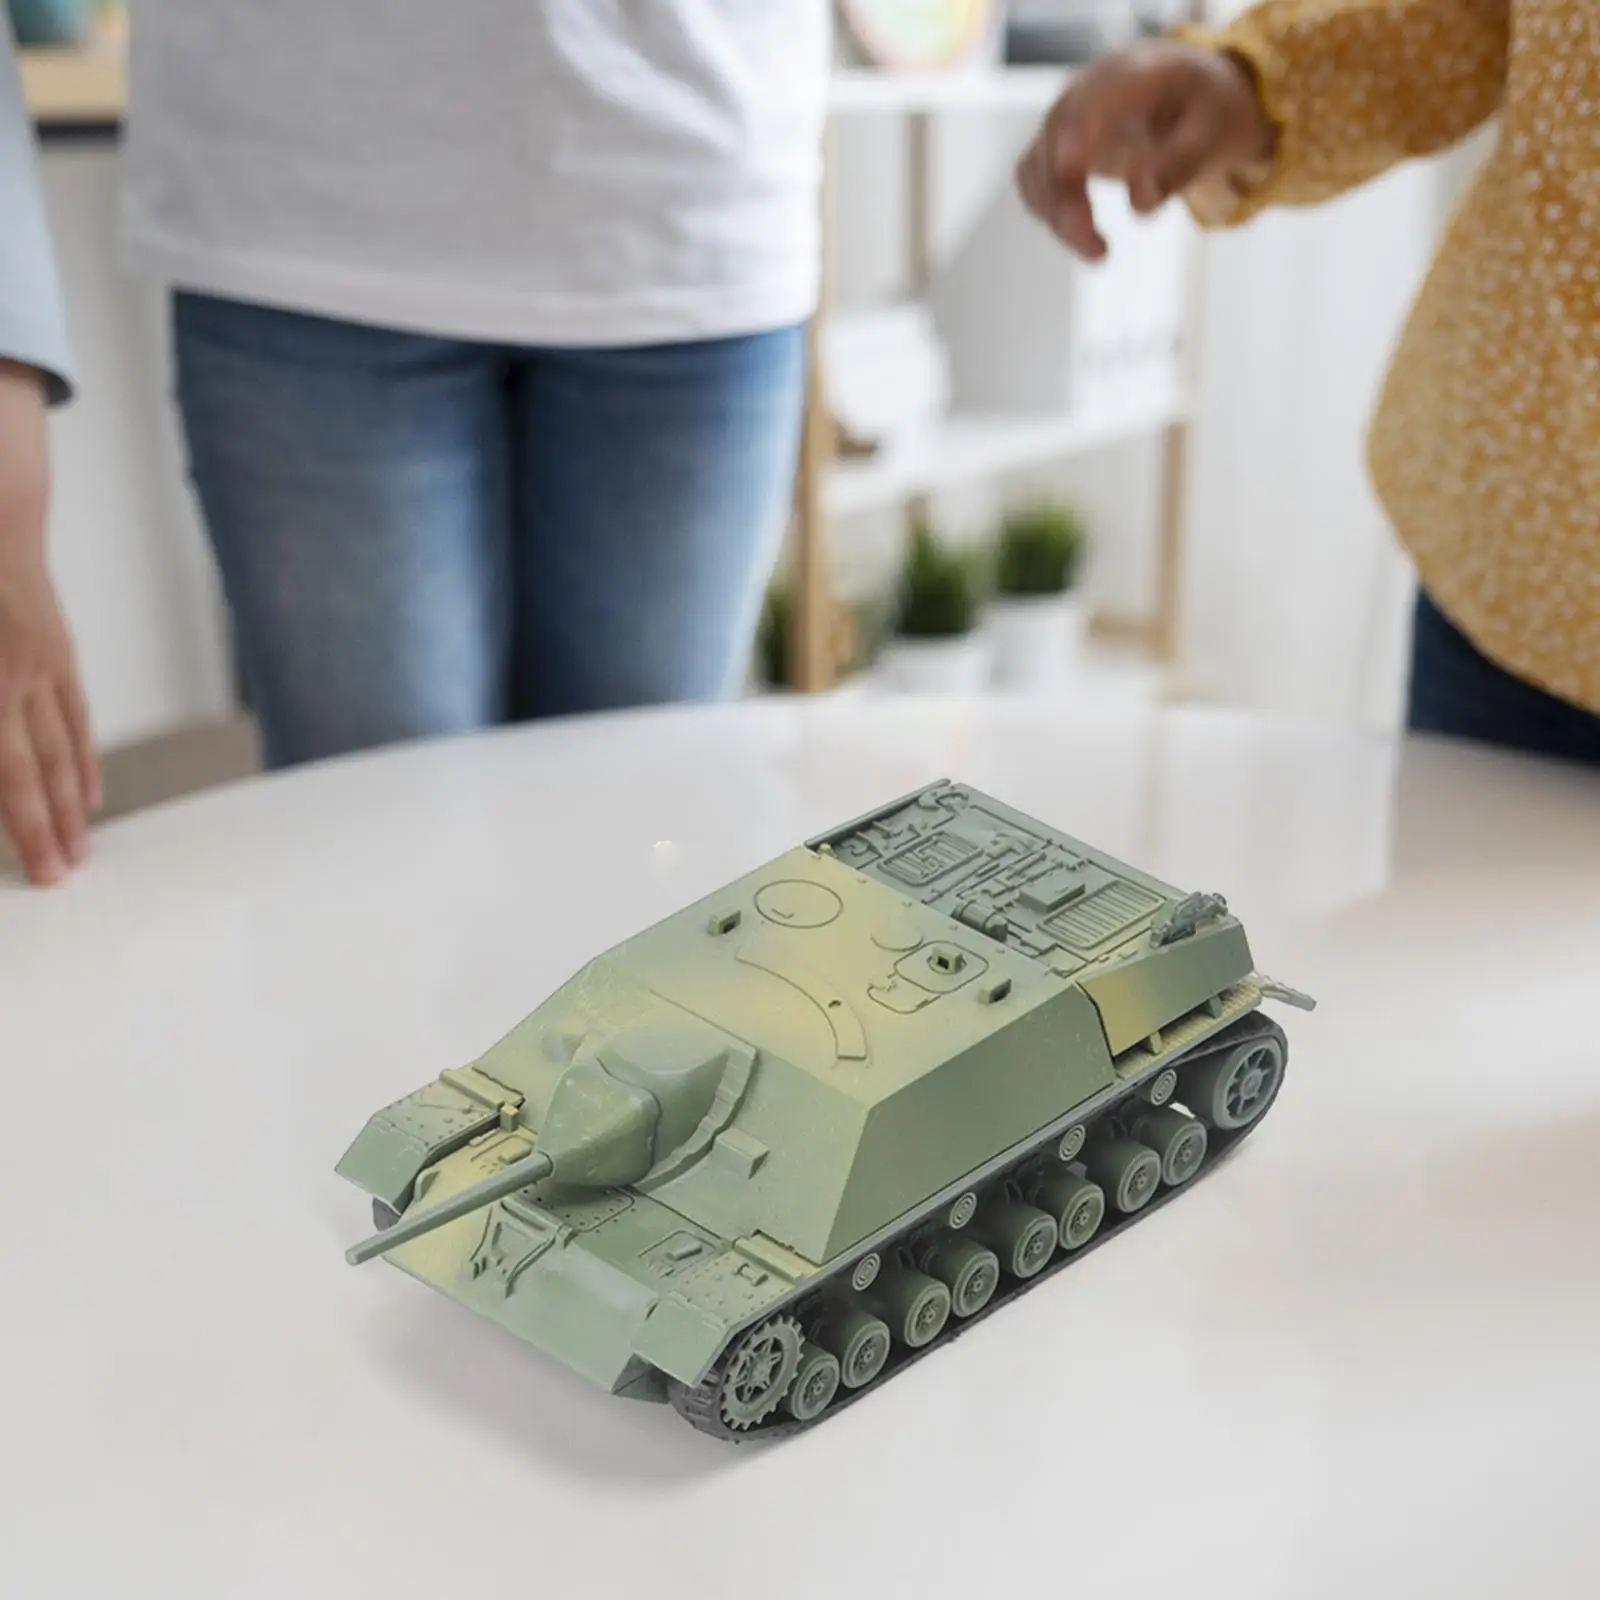 1:72 Scale Armored Tank Model DIY Armored Vehicle Tracked Crawler Chariot for Children Display Boys Table Scene Collectibles